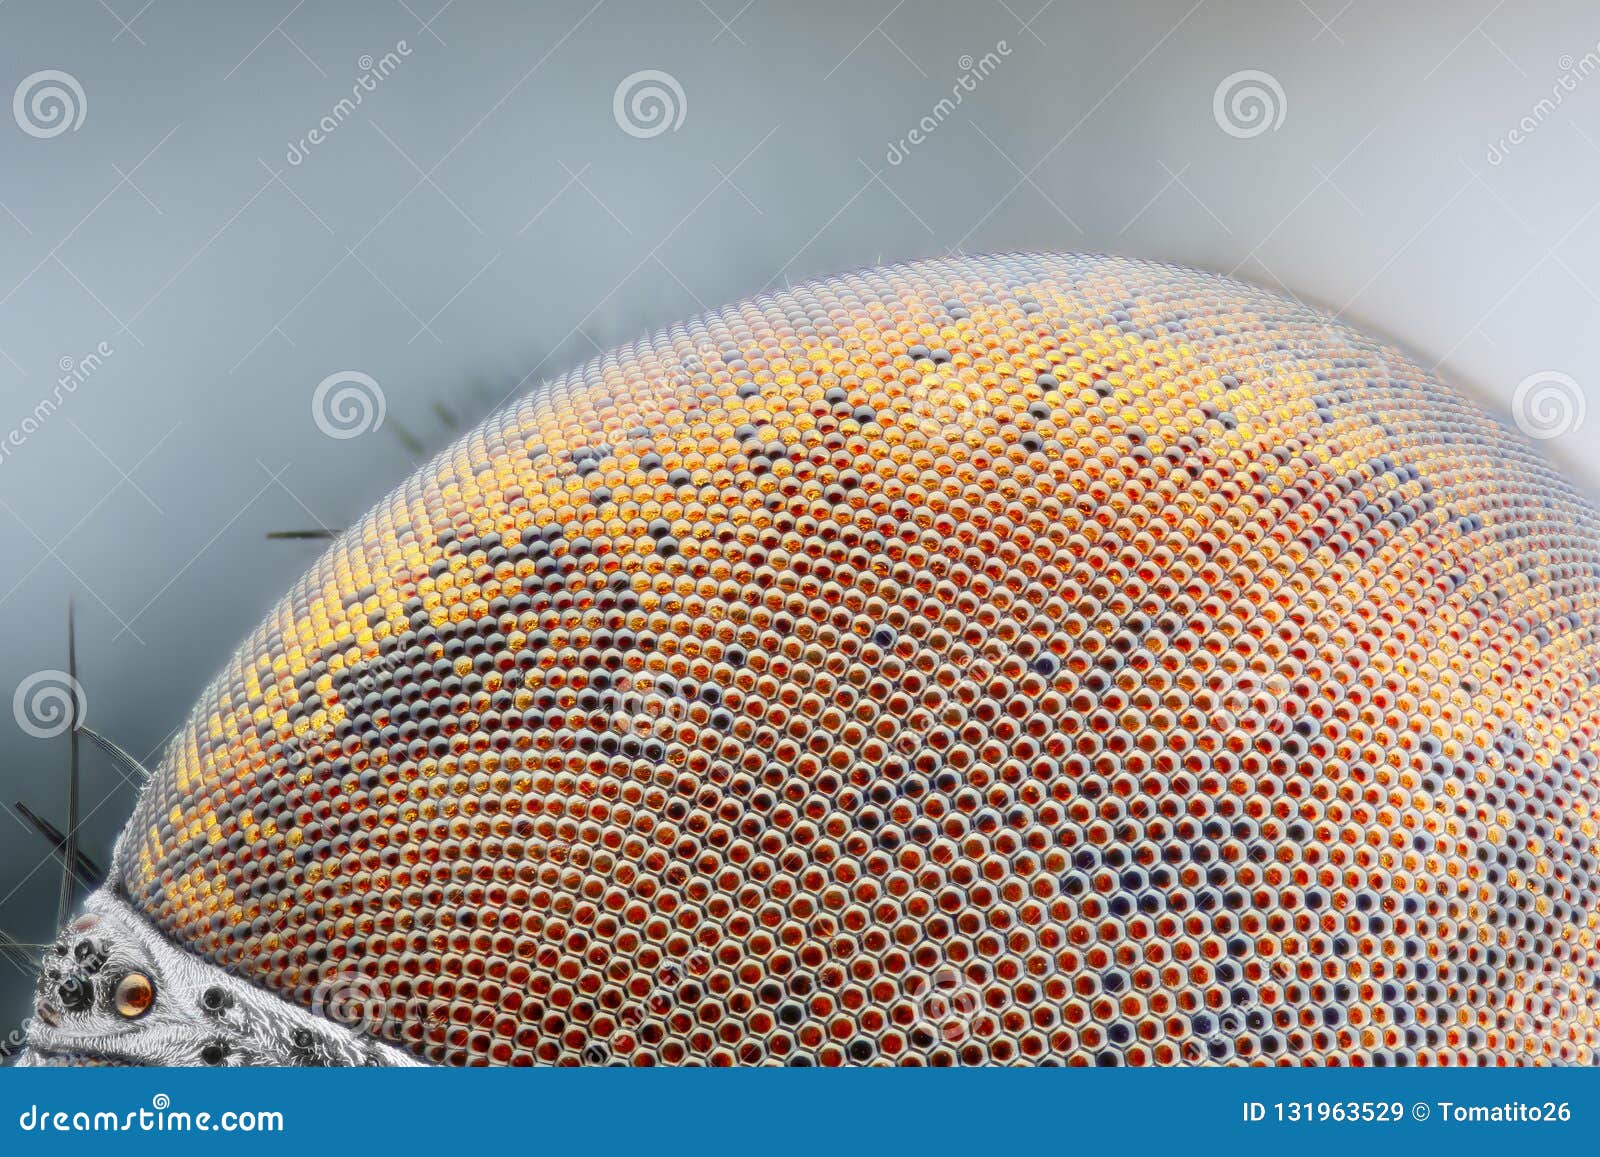 sharp and detailed dried dead fly compound eye surface at extreme magnification taken with microscope objective